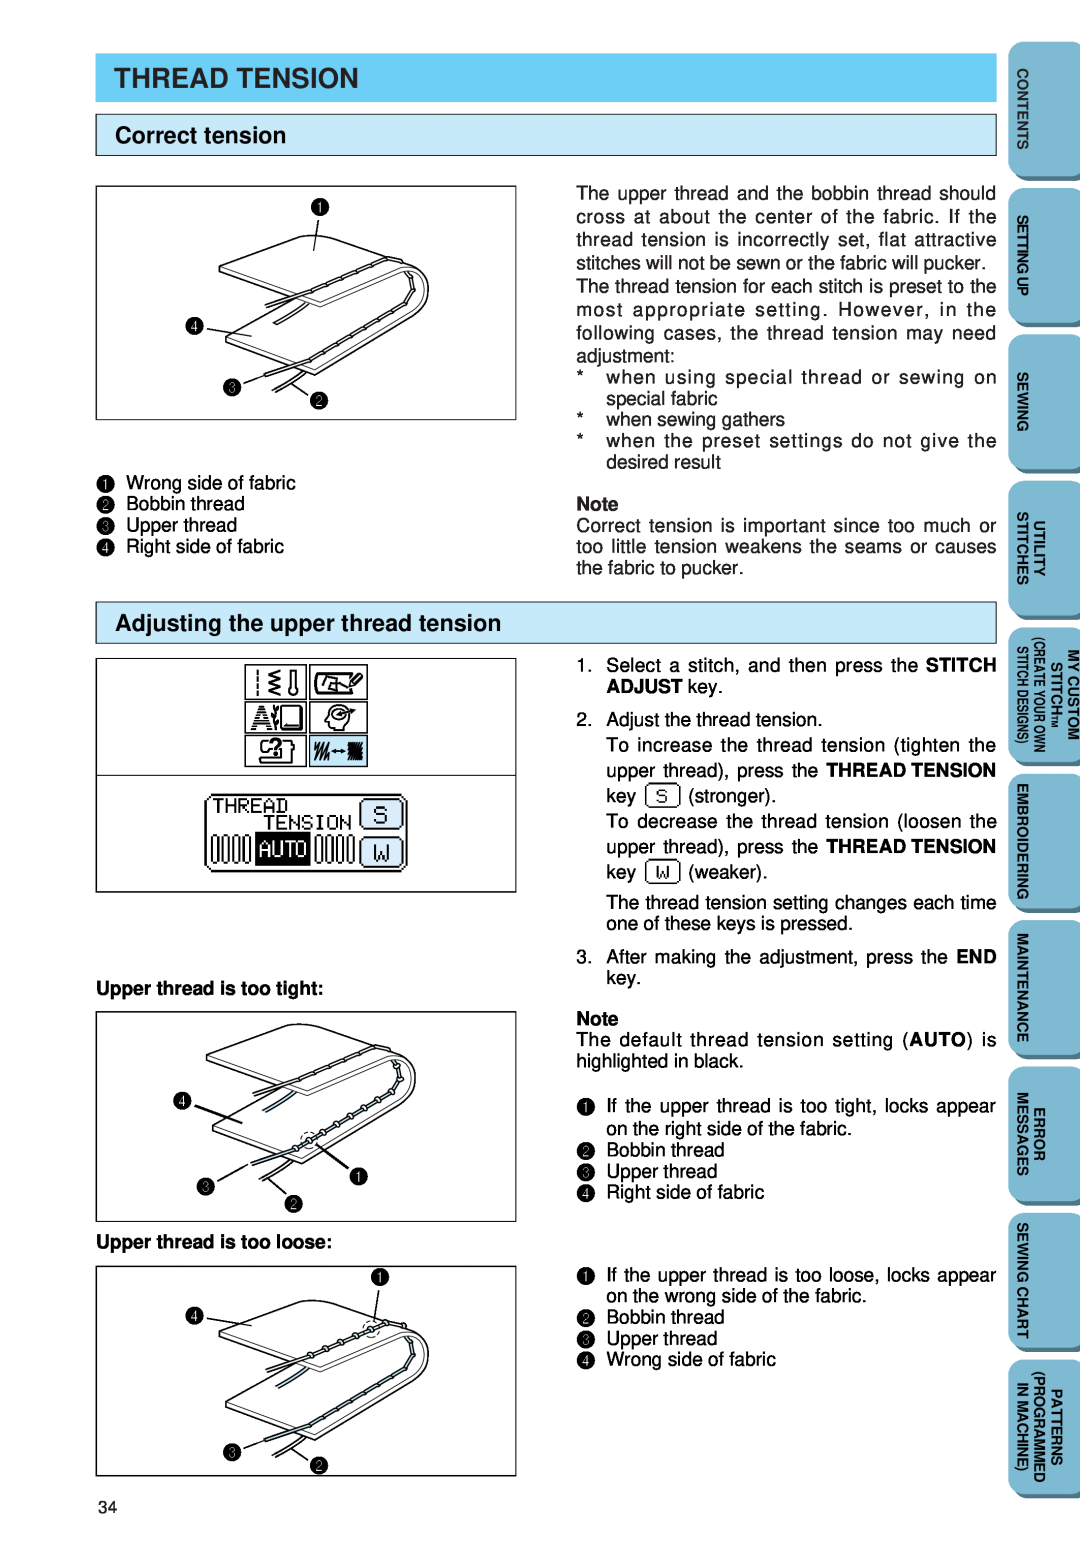 Brother PC 6500 Thread Tension, Correct tension, Adjusting the upper thread tension, Upper thread is too tight 